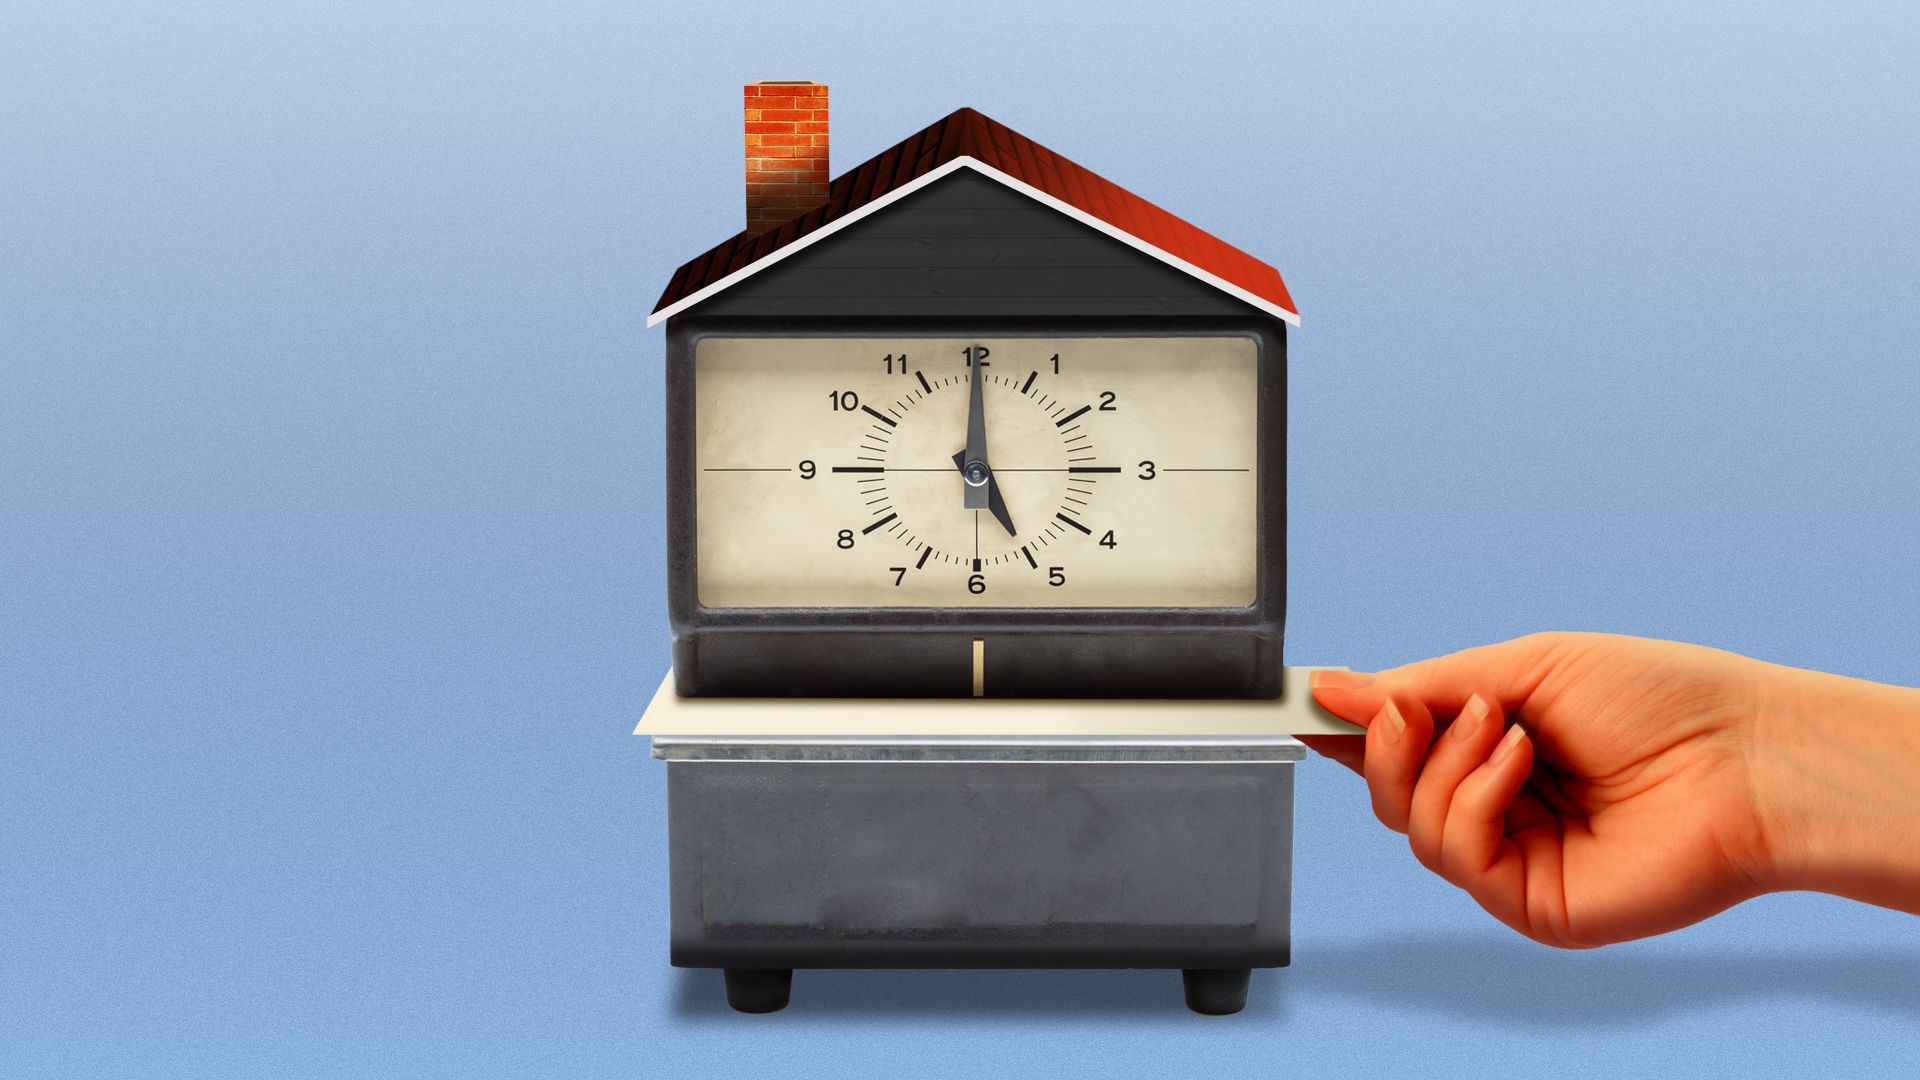 Illustration of a person clocking in on a time clock shaped like a house